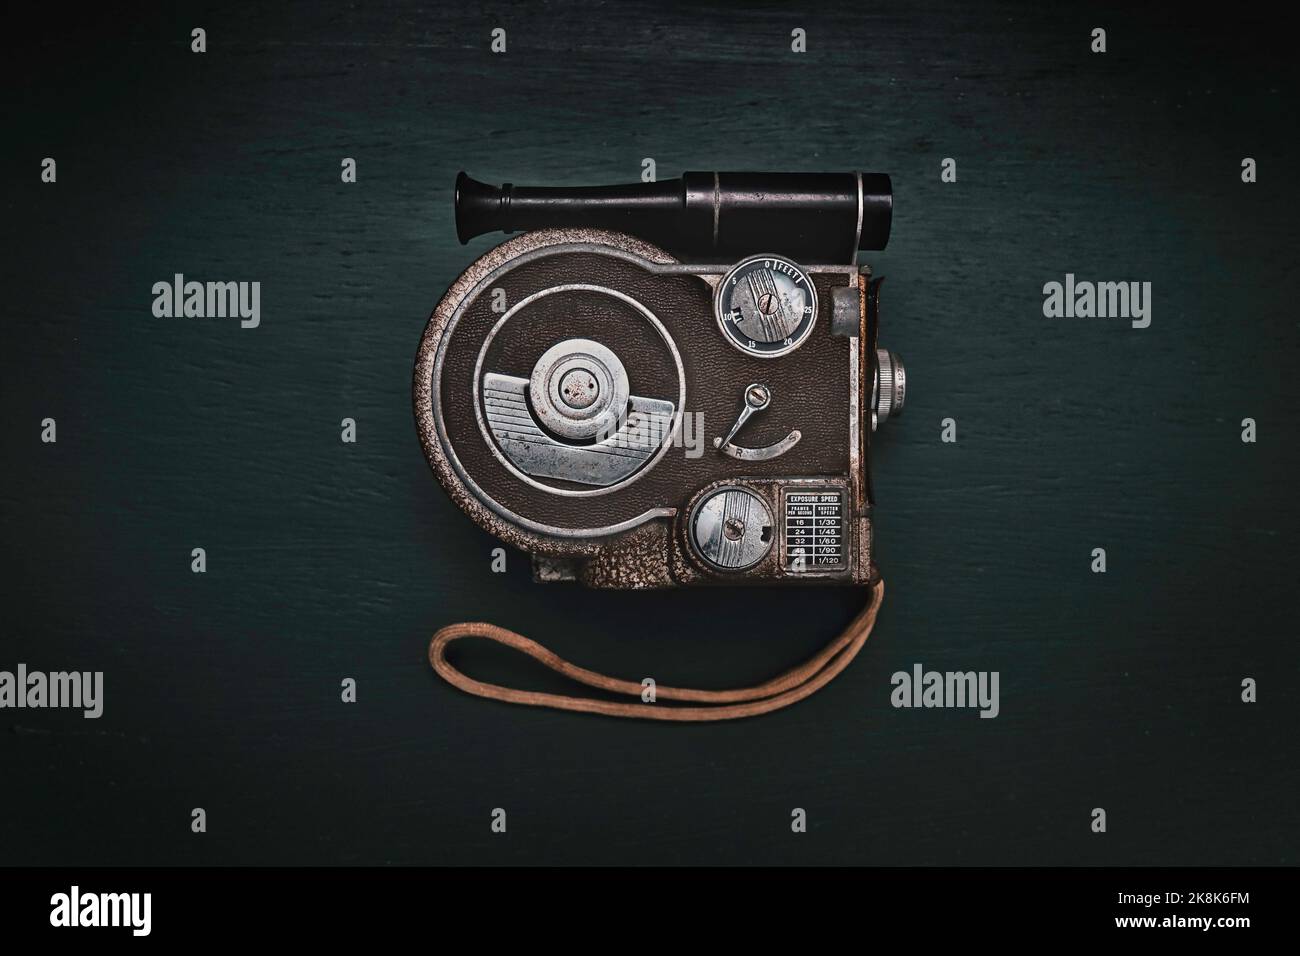 A top view of a vintage cinema camera against a dark background Stock Photo